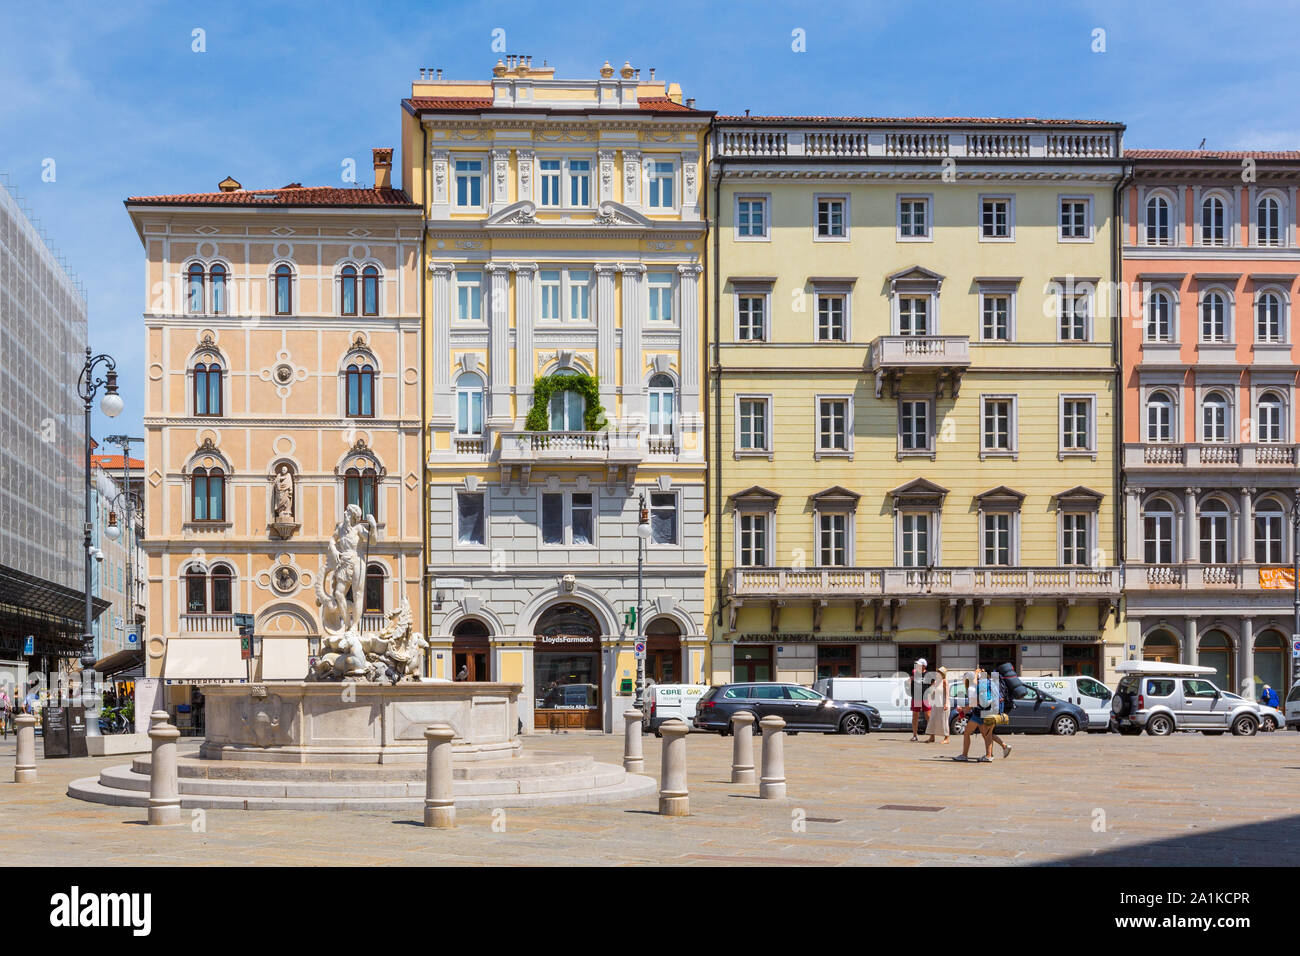 JULY 22, 2019 - TRIESTE, ITALY - Piazza Borsa, in the historic centre of Trieste Stock Photo